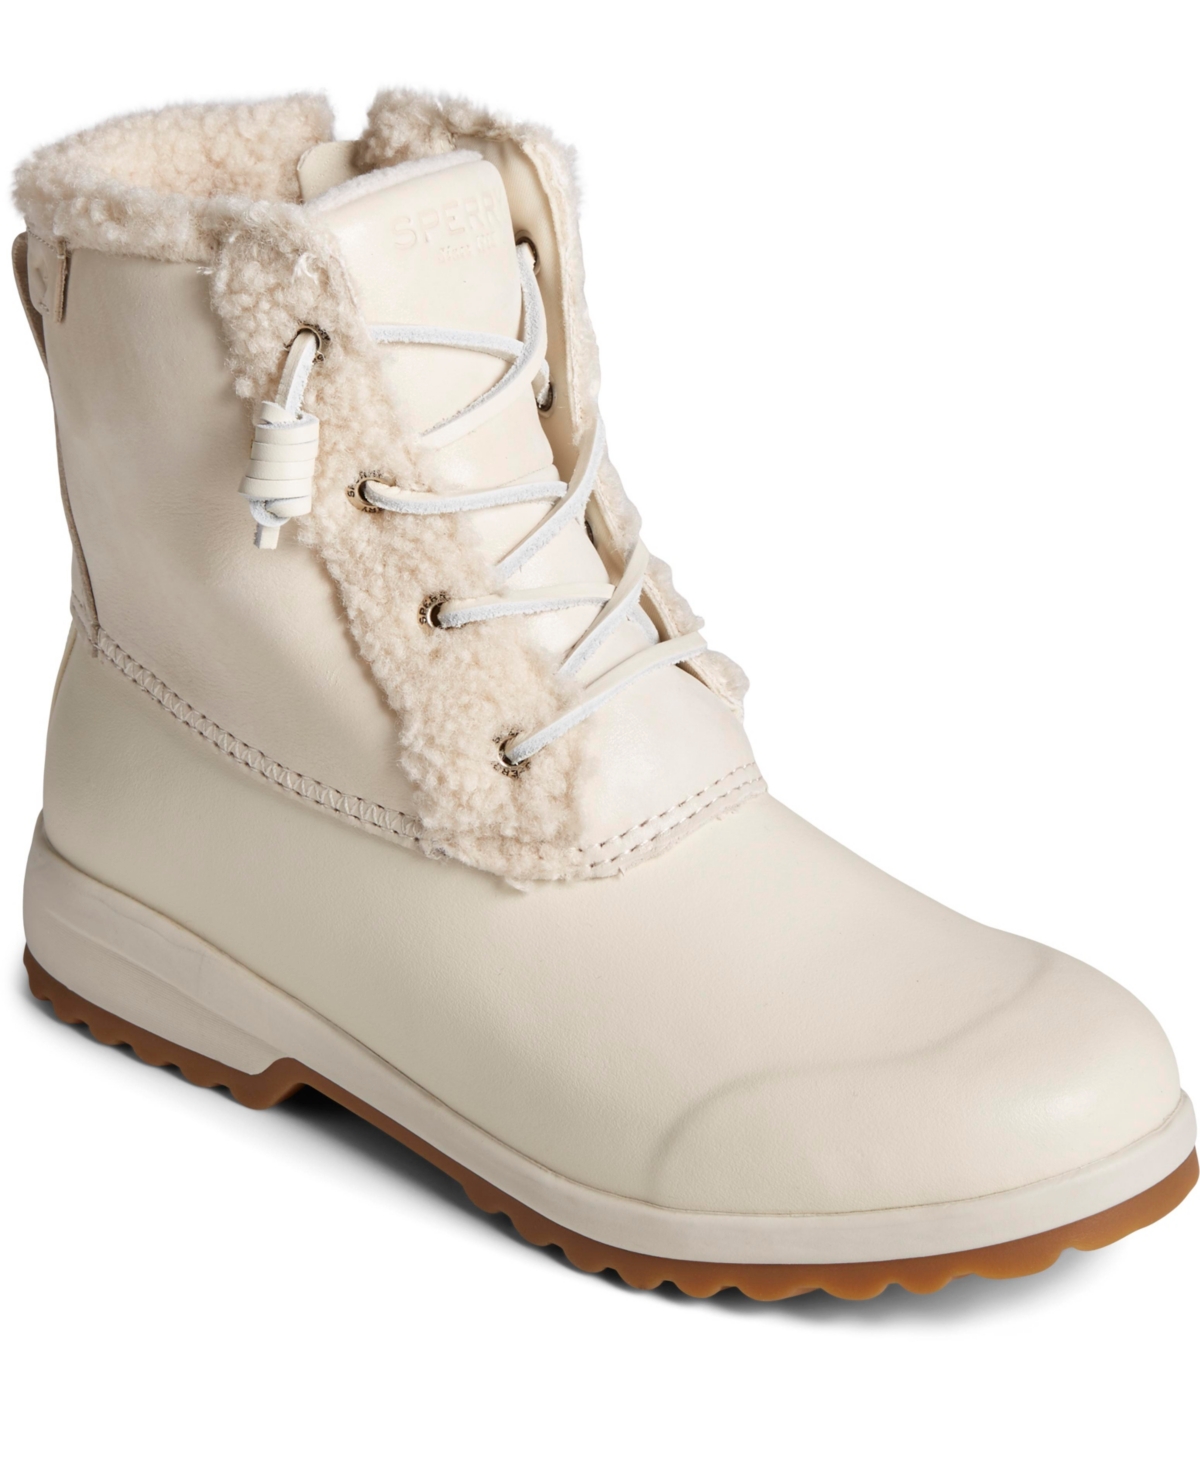 Women's Maritime Repel Teddy Boots - Ivory